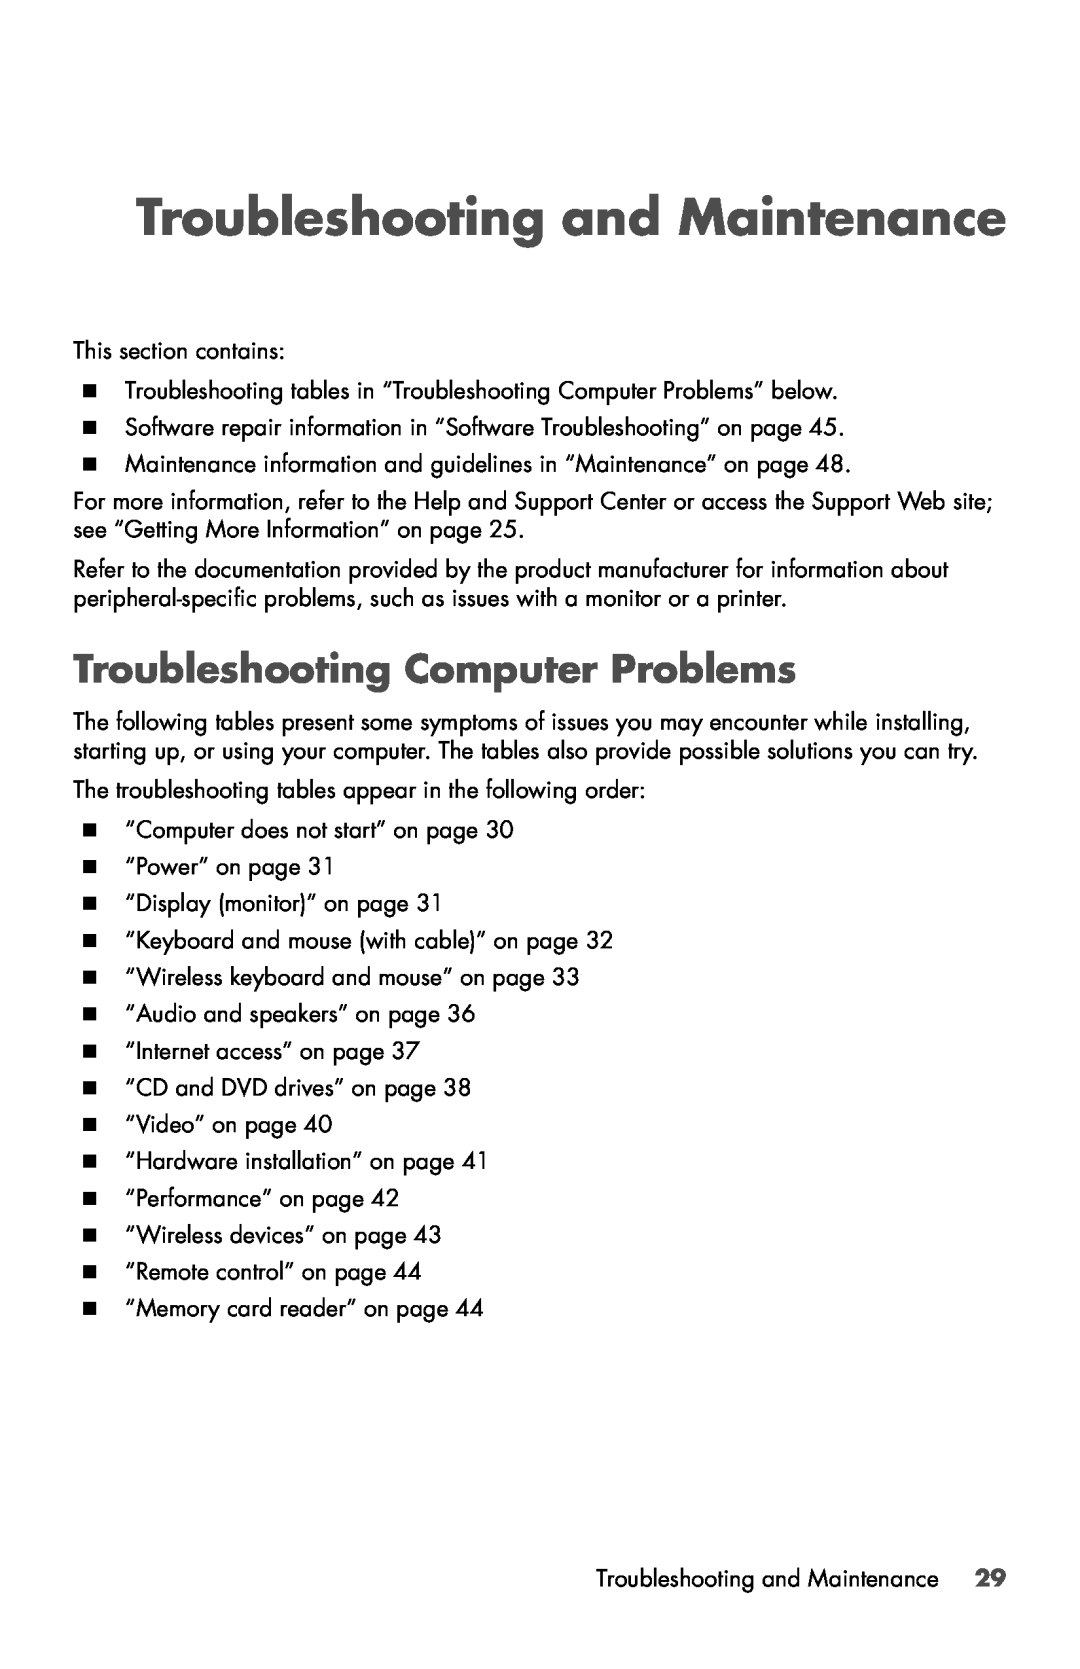 HP 810-209, 120-1000z, 120-1031, 120-1150xt, 120-1134 manual Troubleshooting and Maintenance, Troubleshooting Computer Problems 